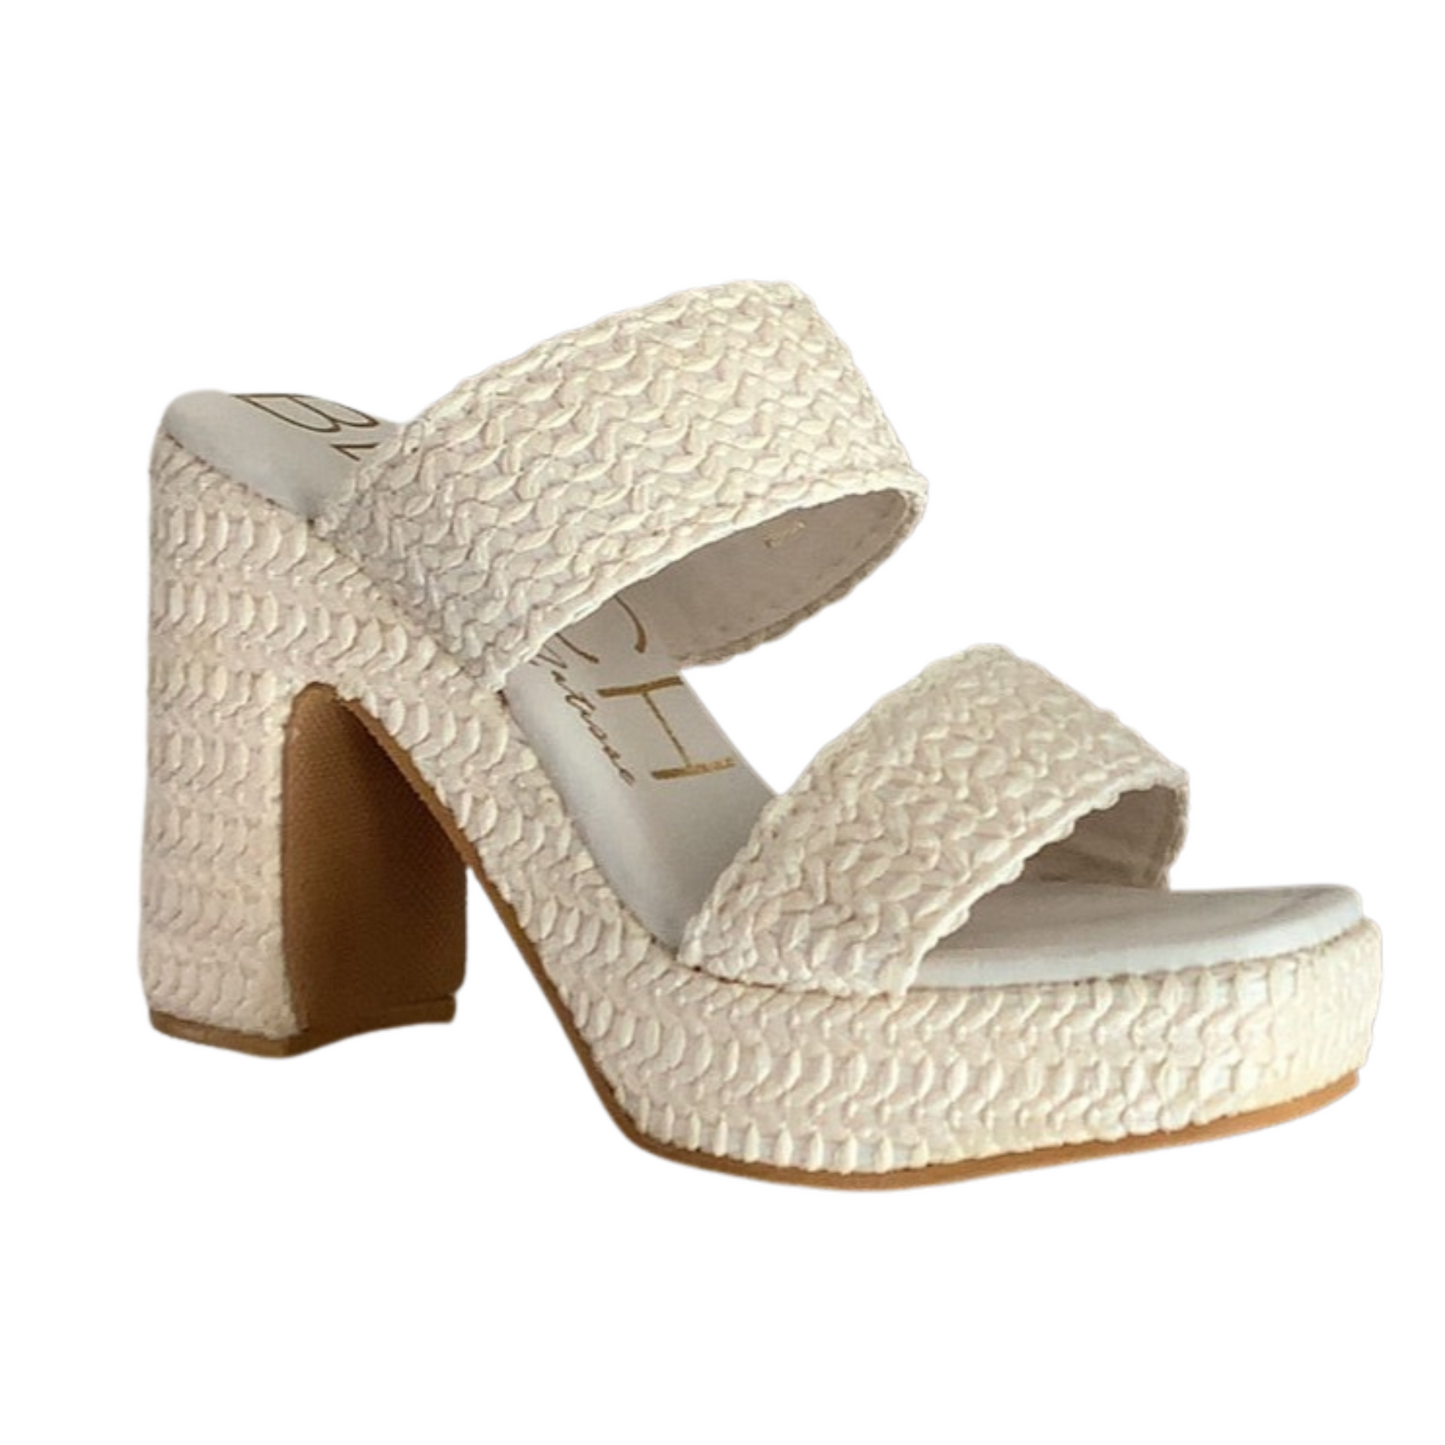 Gem by Matisse is a unique slip-on wedge evoking timeless summer style. Woven texture adds visual interest, while the pink and white colors give added versatility. Perfect for a day out or night on the town.